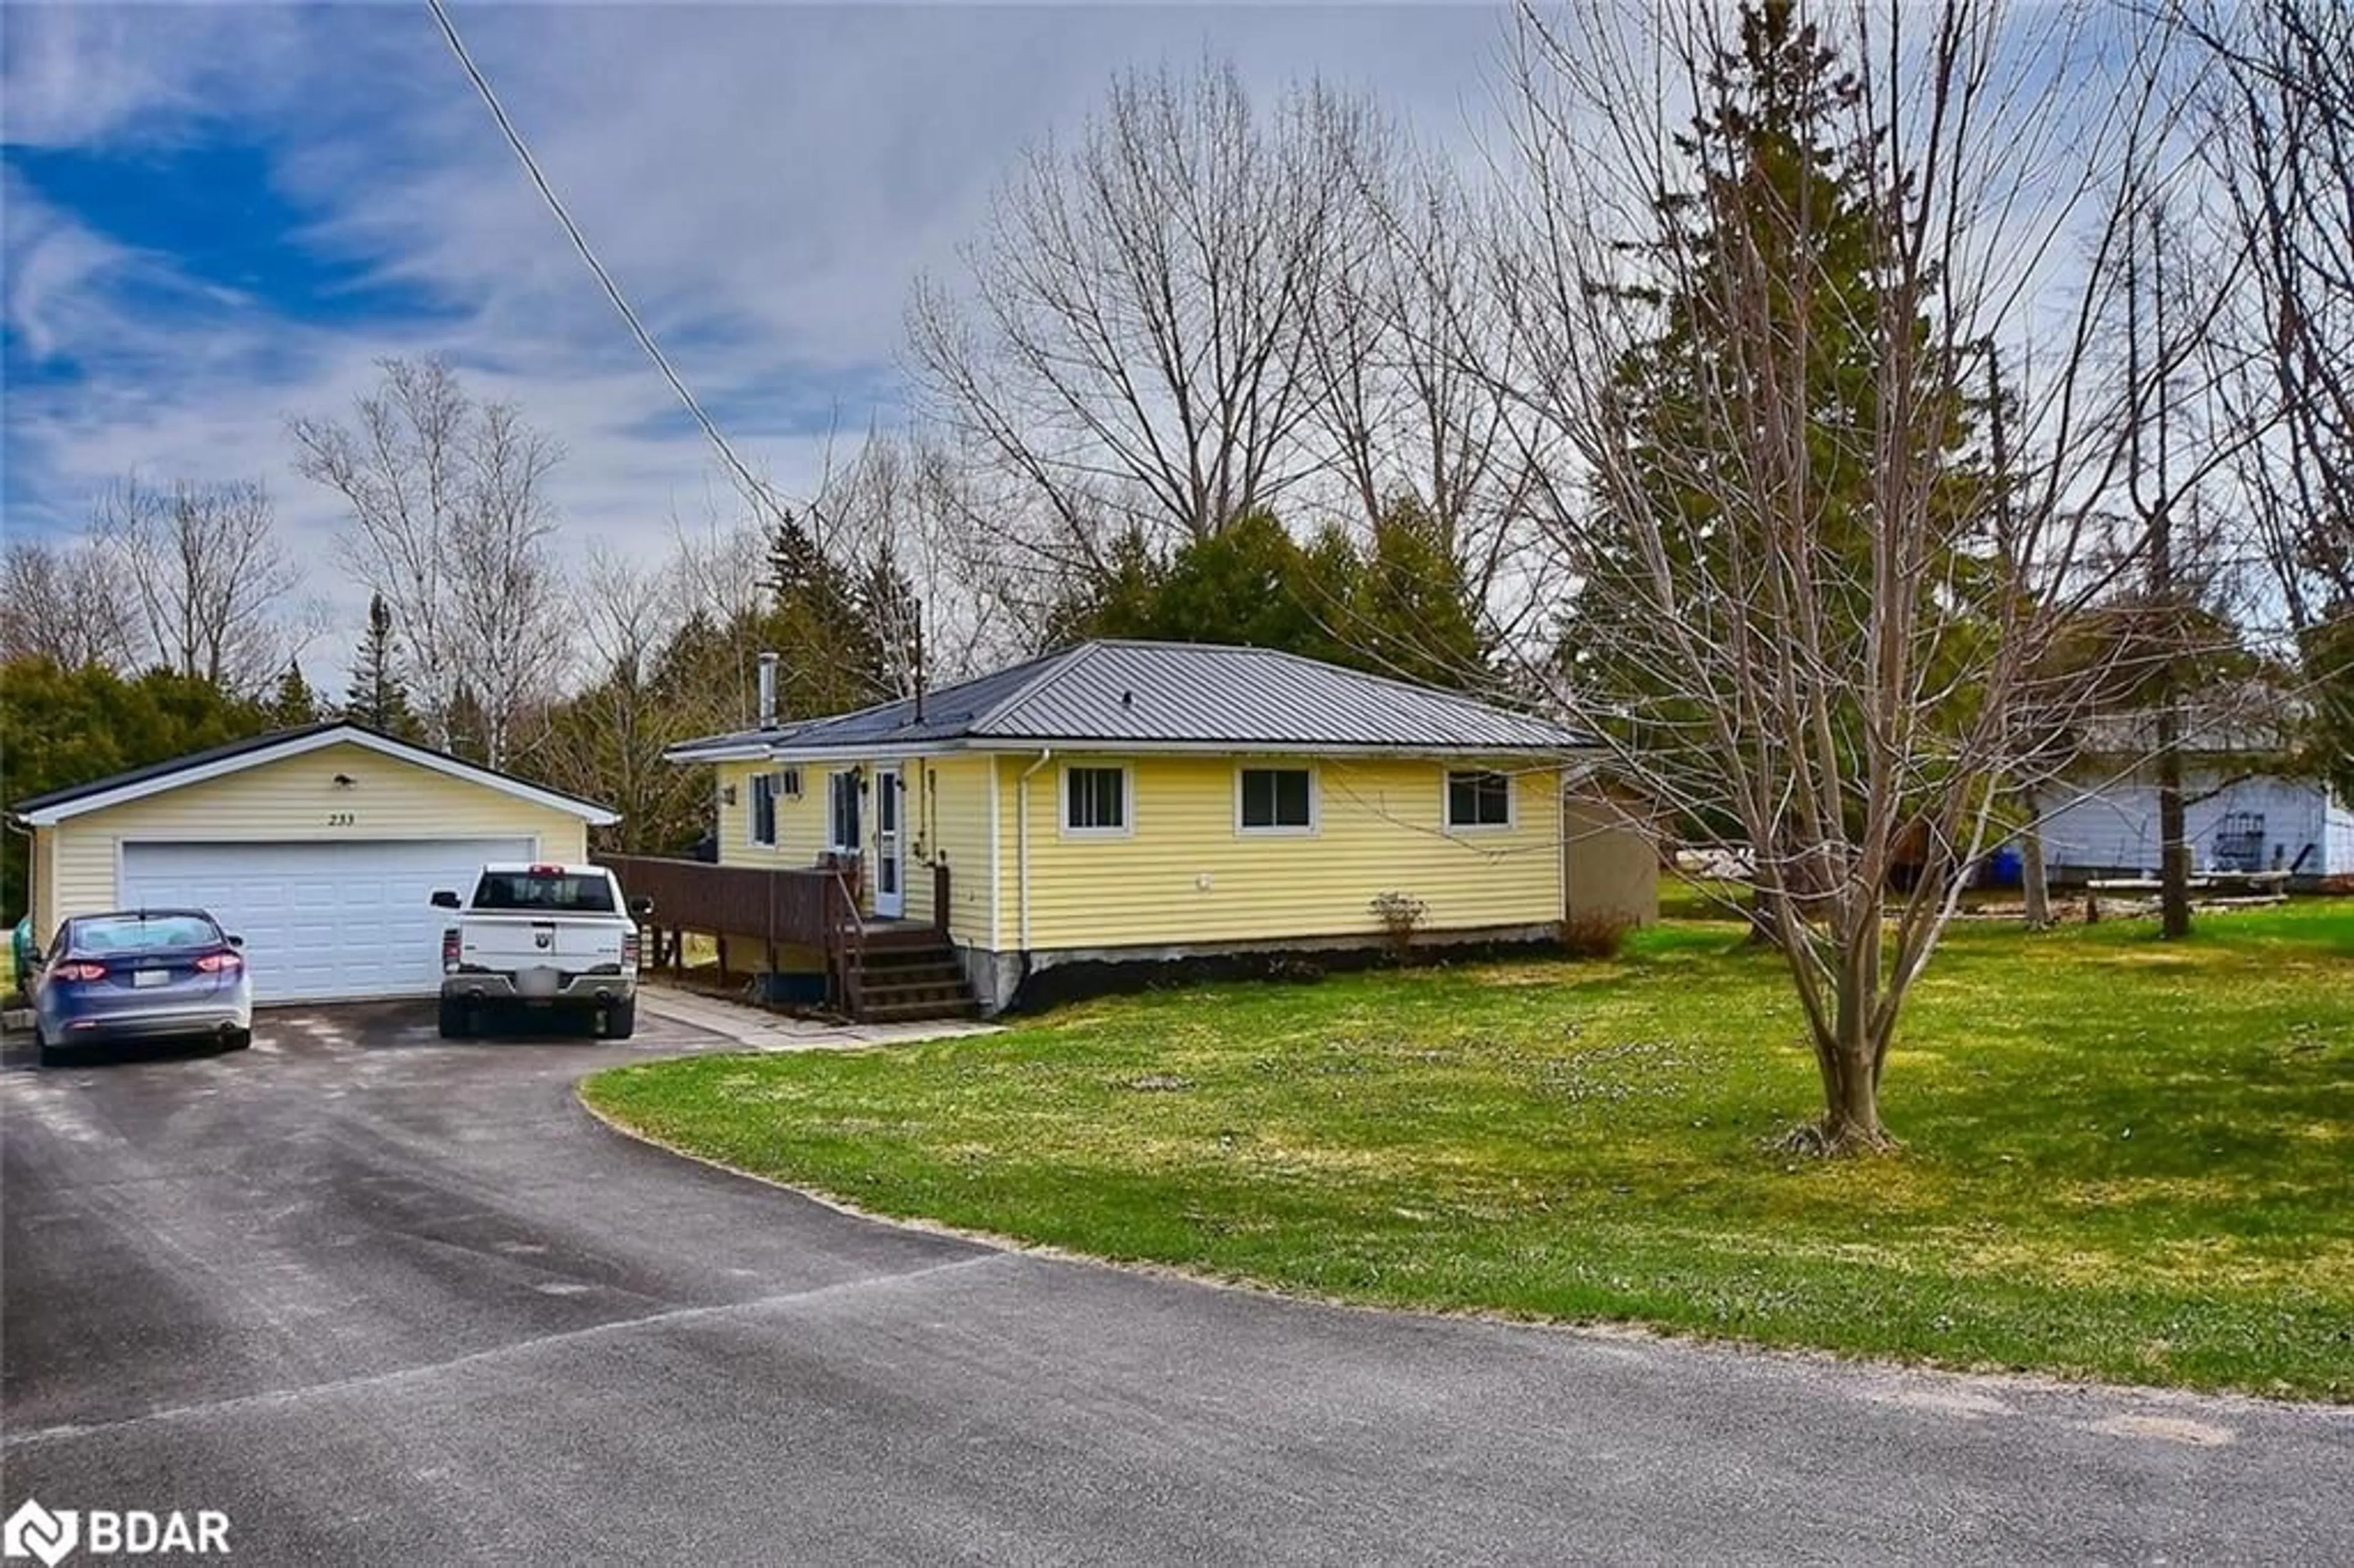 Frontside or backside of a home for 233 Crosby Dr, Bobcaygeon Ontario K0M 1A0